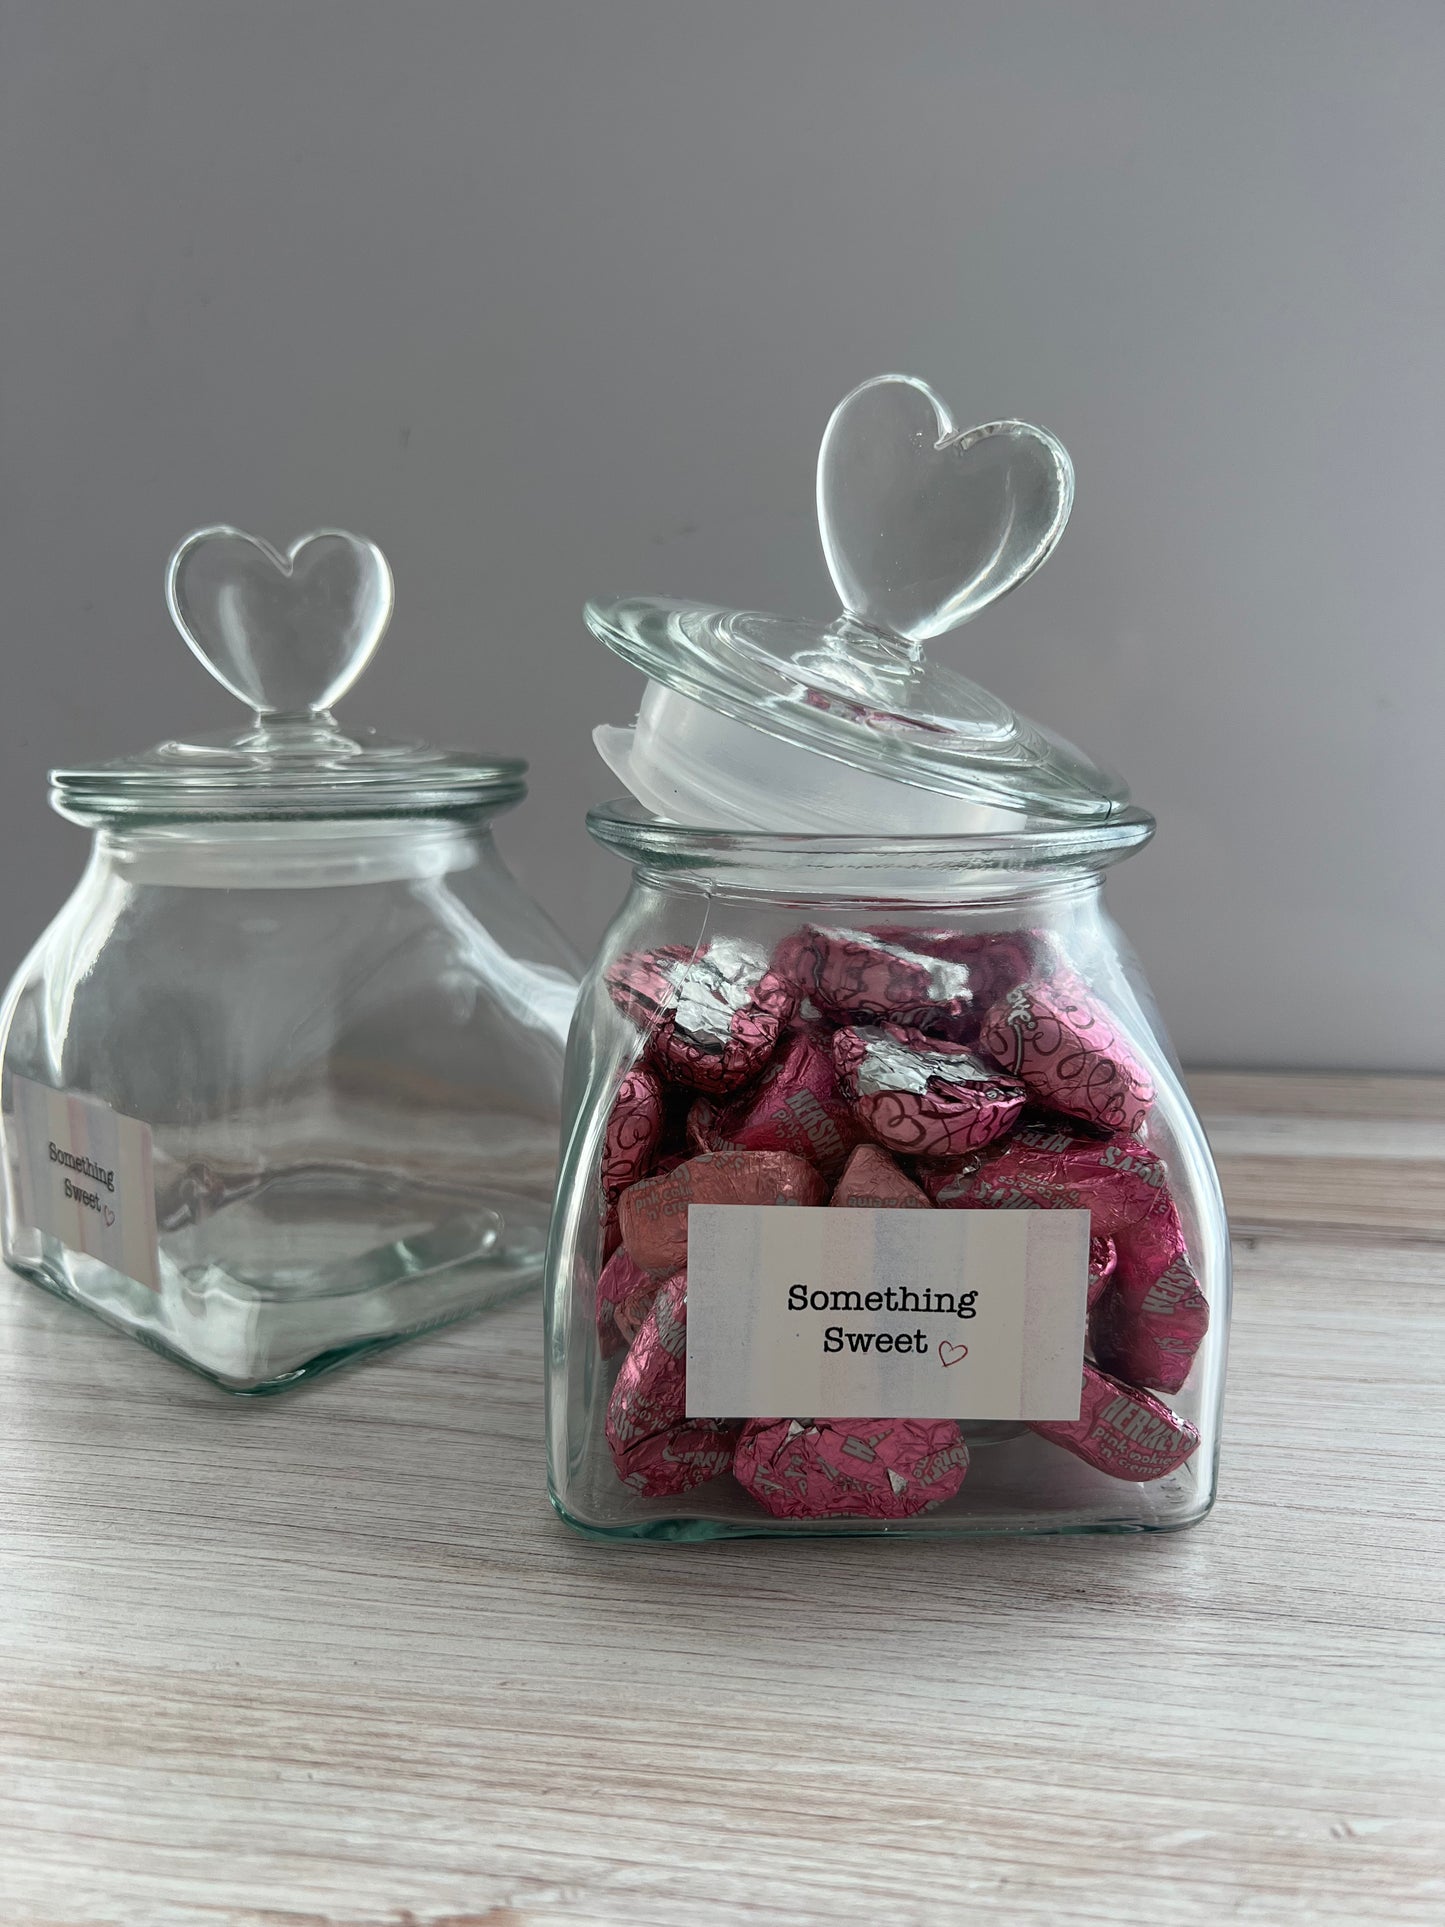 Shop Heart shaped candy Jars With Spice It Your Way